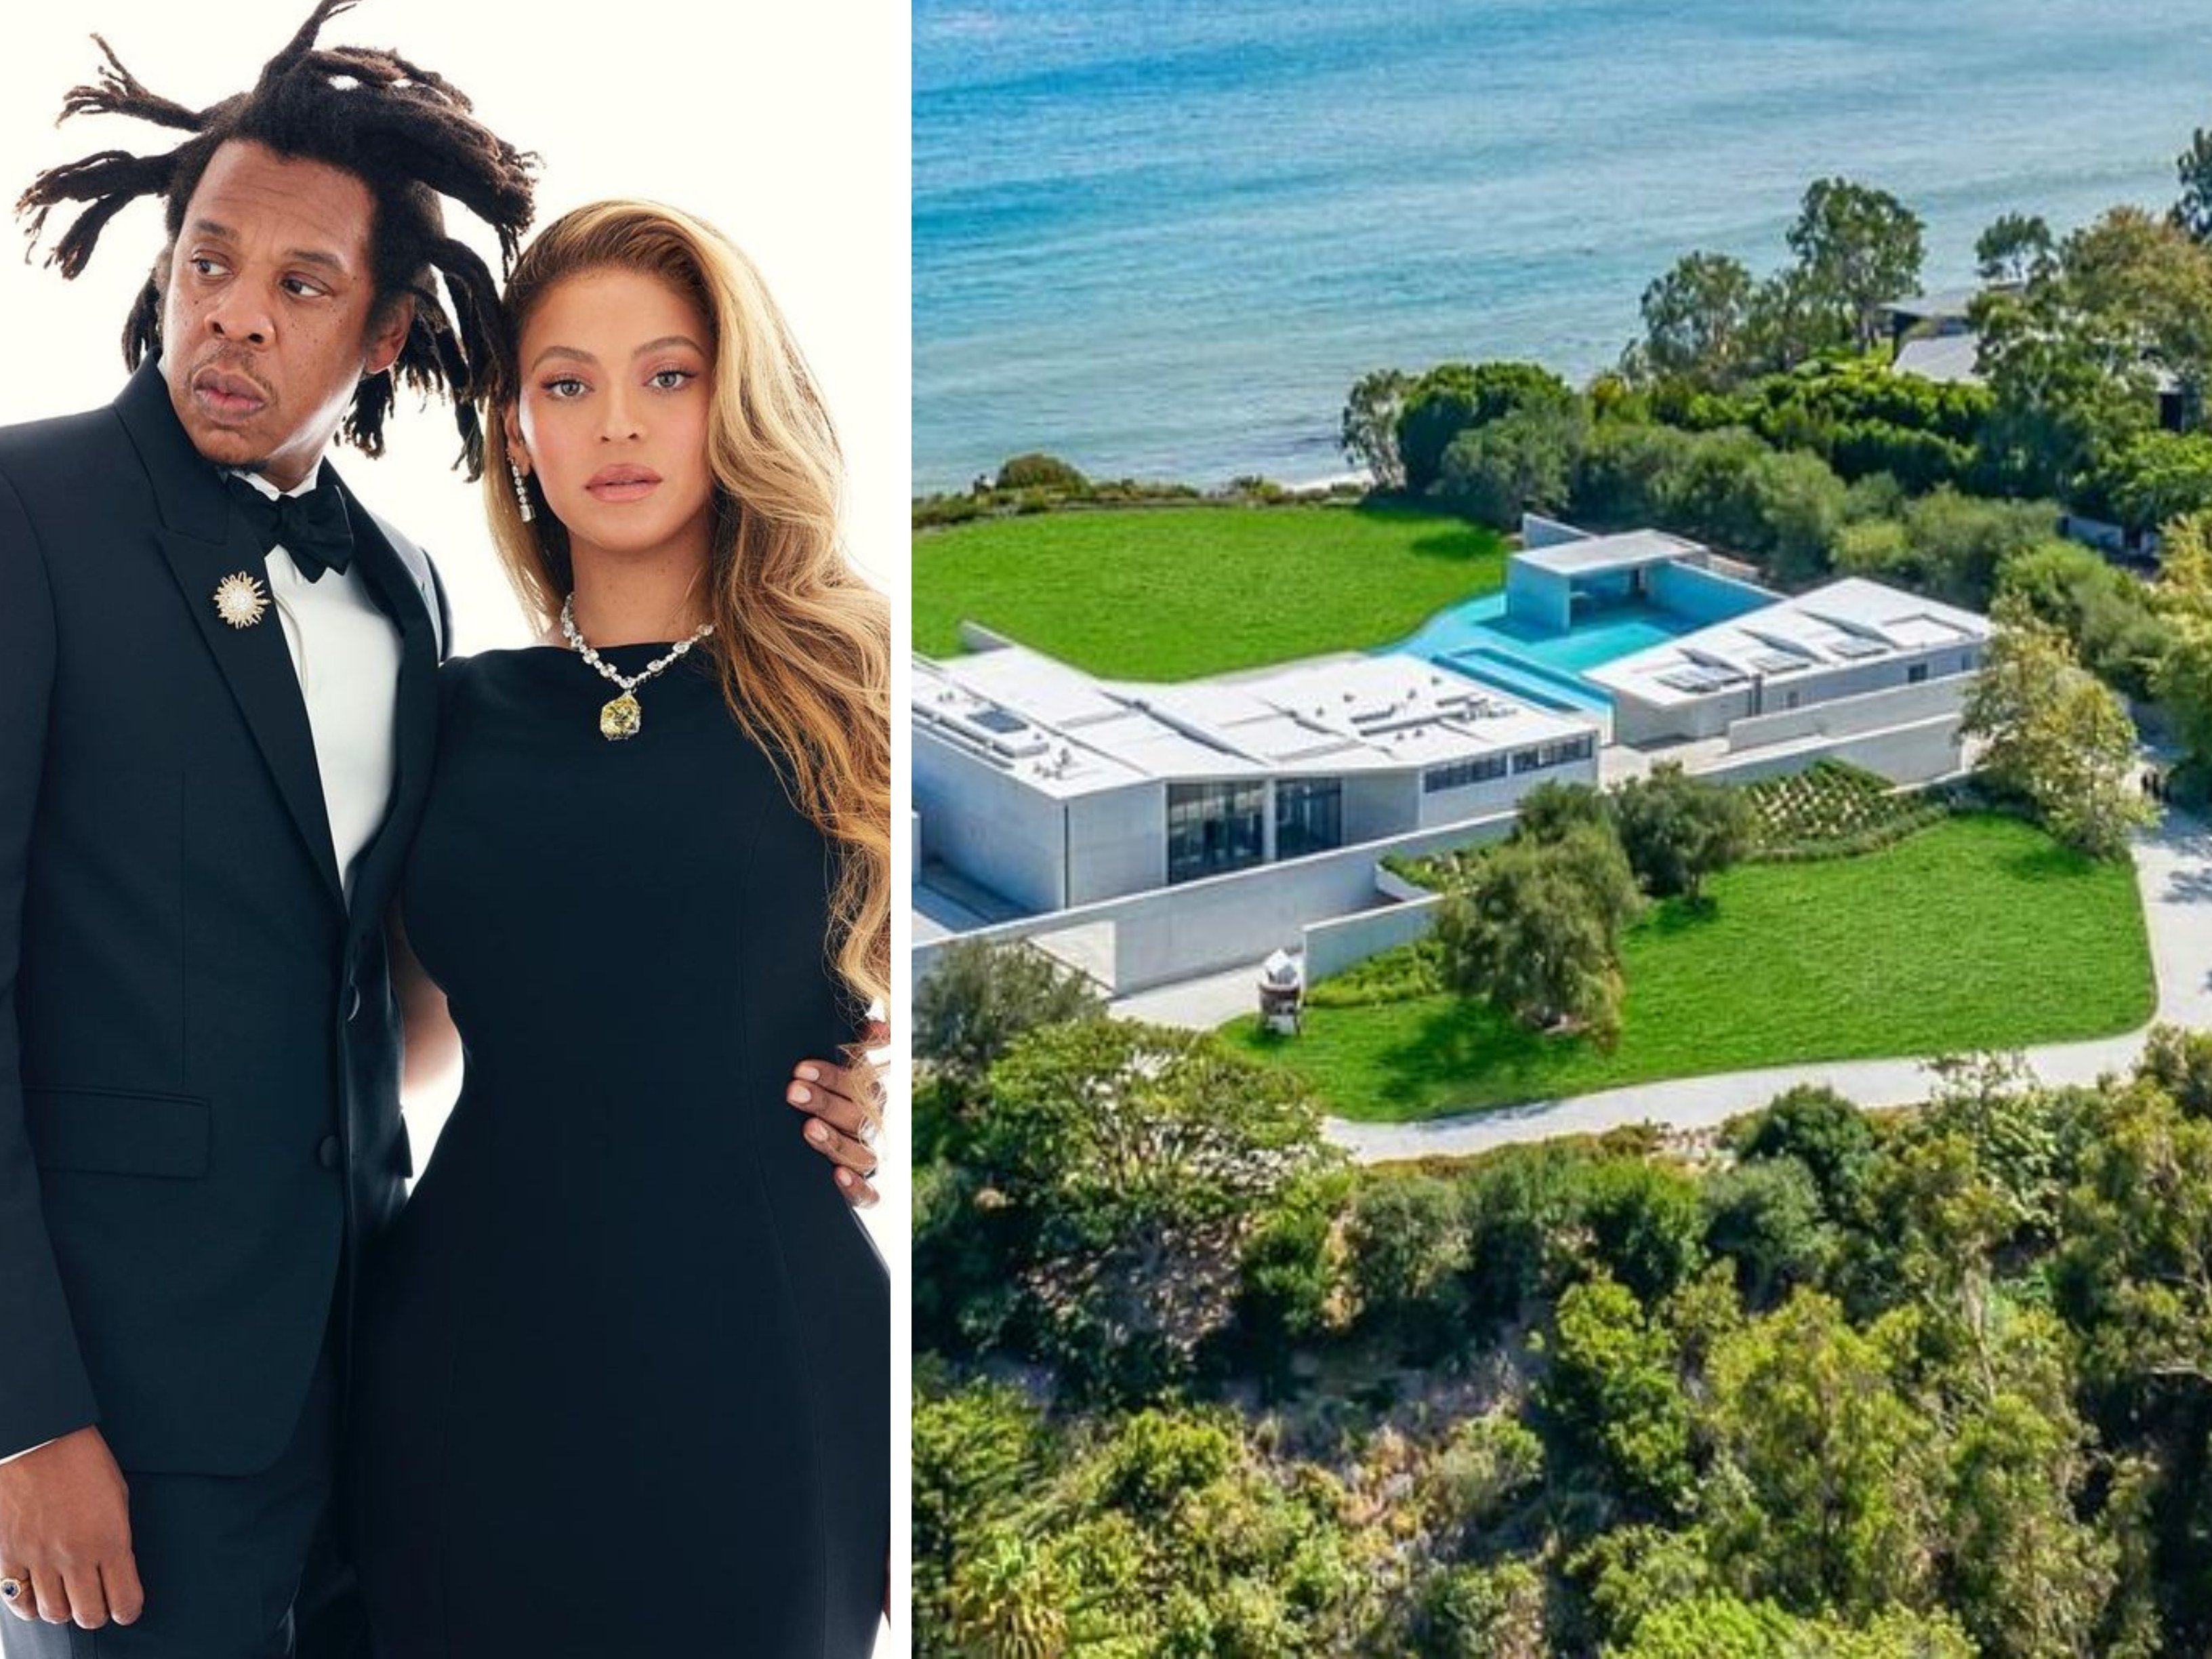 Beyoncé and Jay-Z bought a US$200 million Malibu mansion in California’s famed Billionaires’ Row with breathtaking coastline views. Photos: @beyonce/Instagram; Handout